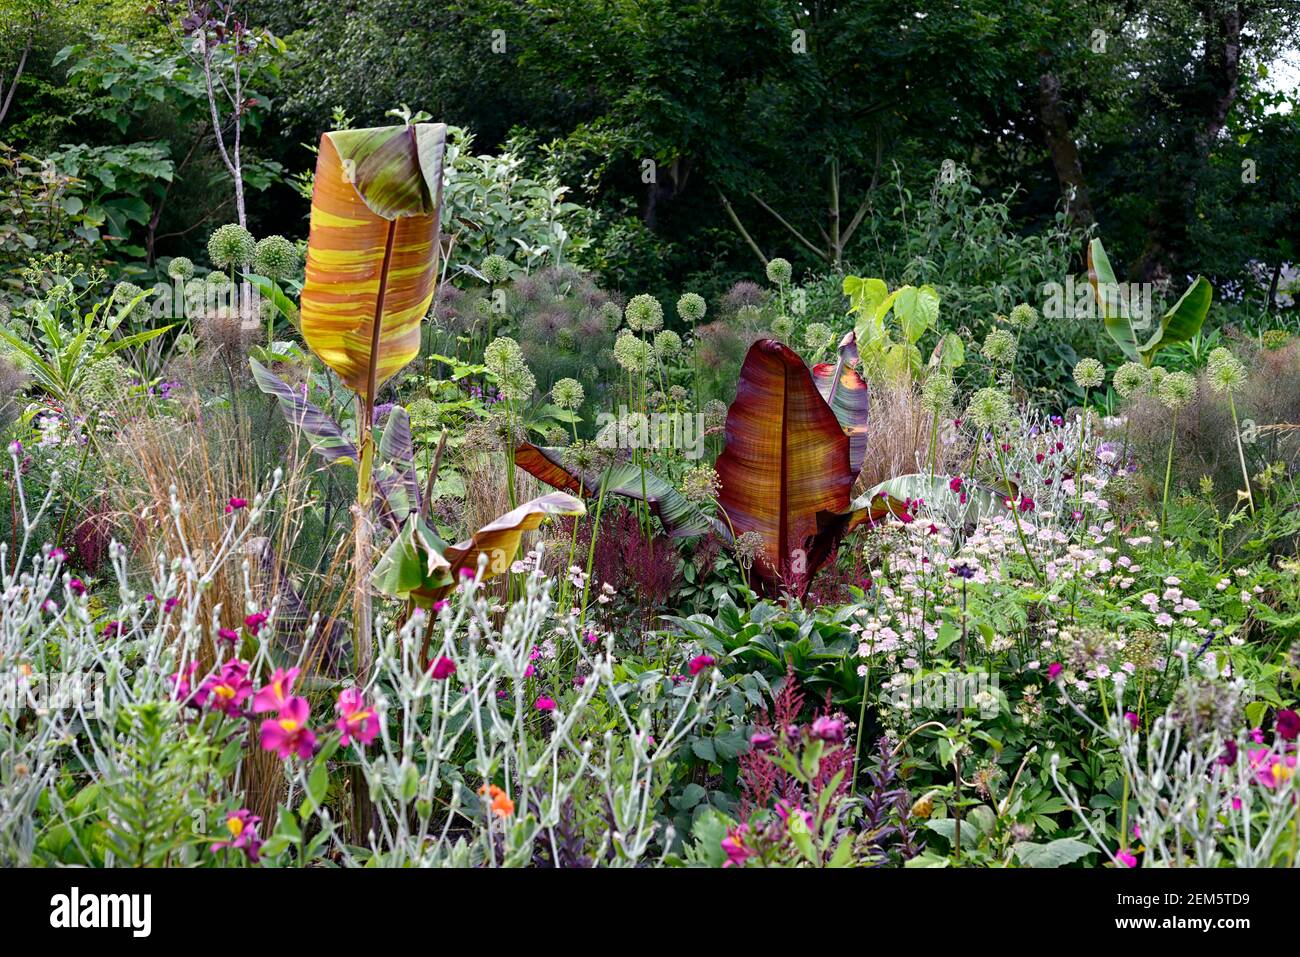 musa sikkimensis bengal tiger,Red leaved Abysssinian banana, Ensete ventricosum Maurelii,lychnis coronaria gardeners world,leaves,foliage,tropical,pla Stock Photo